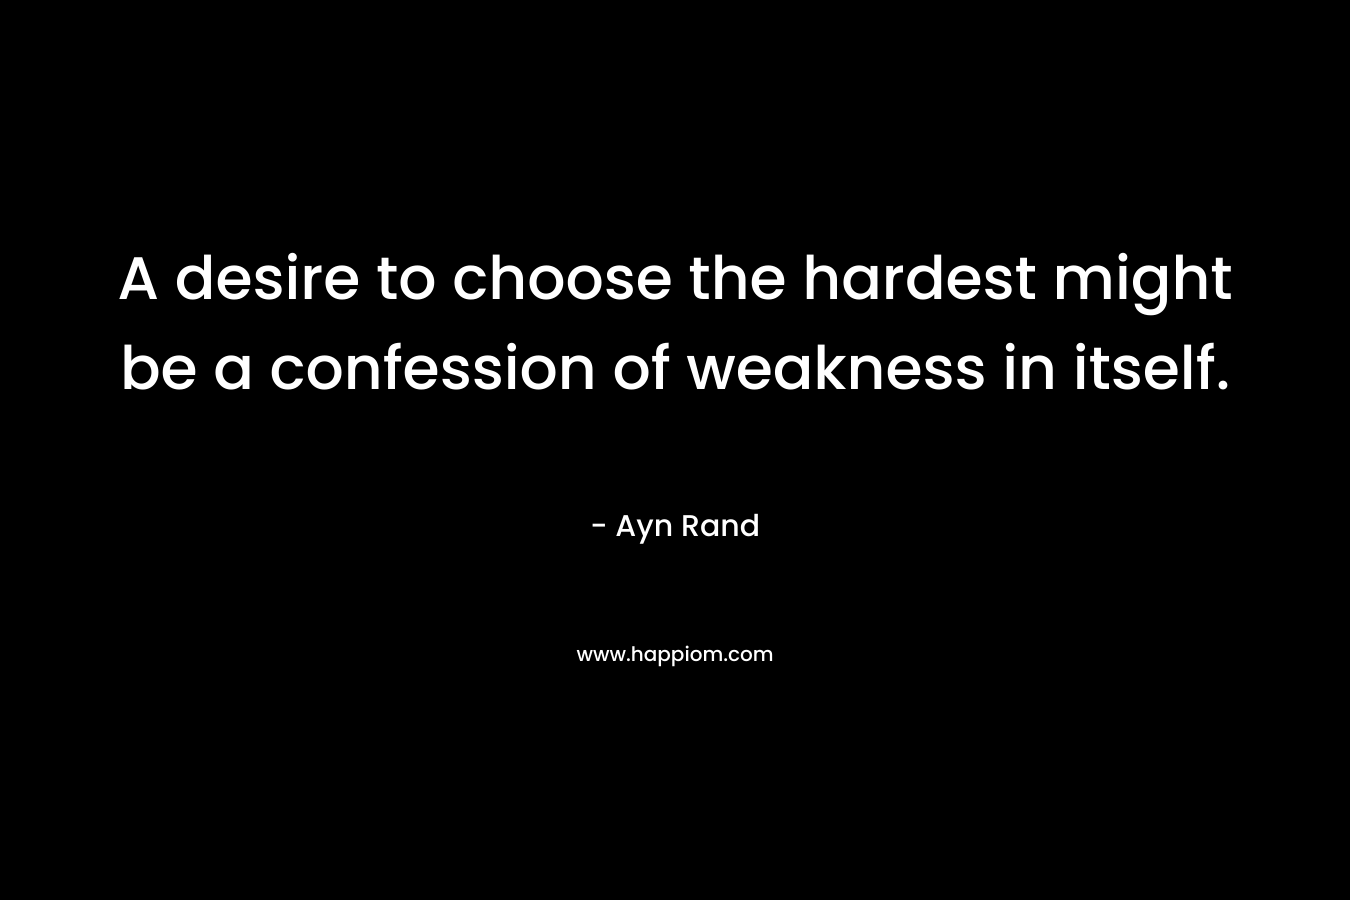 A desire to choose the hardest might be a confession of weakness in itself.